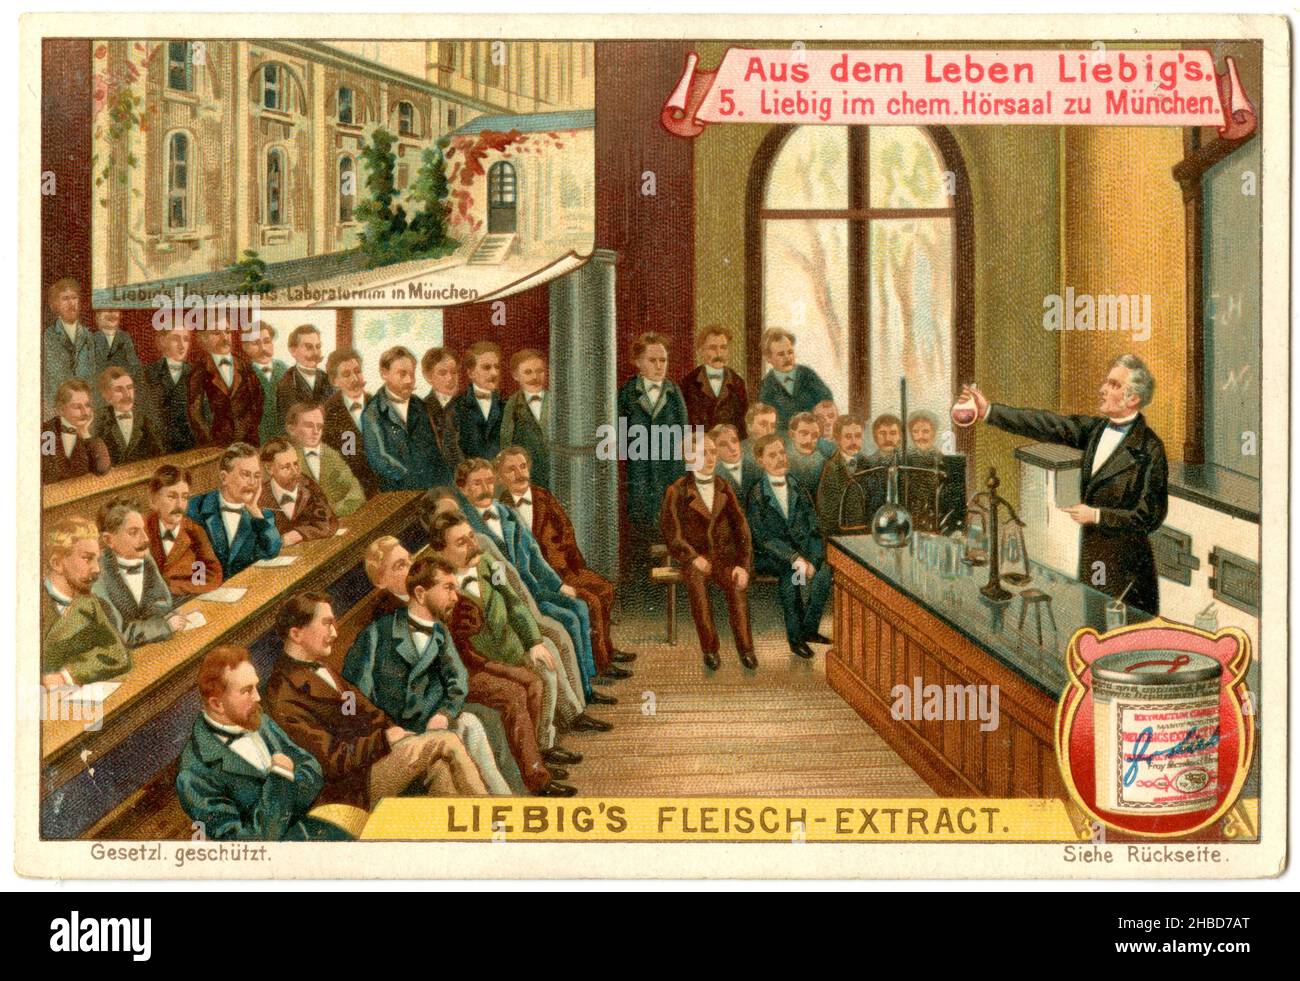 Justus Liebig teaches in the hemic auditorium in Munich. From the life of Liebig. (5.) Text on the back: 'In Munich it was to be further revealed to what high things Liebig was called. He, who had never stood behind a plow, never tilled a field, became the great reformer of agriculture. It was reserved for the youngest of all sciences, chemistry, to bring about a thorough revolution in the oldest of all human trades, agriculture. It was Liebig who taught the scientific principles of plant life, who for the first time revealed the true nature of fertilizer. Liebig's research in the field of agr Stock Photo